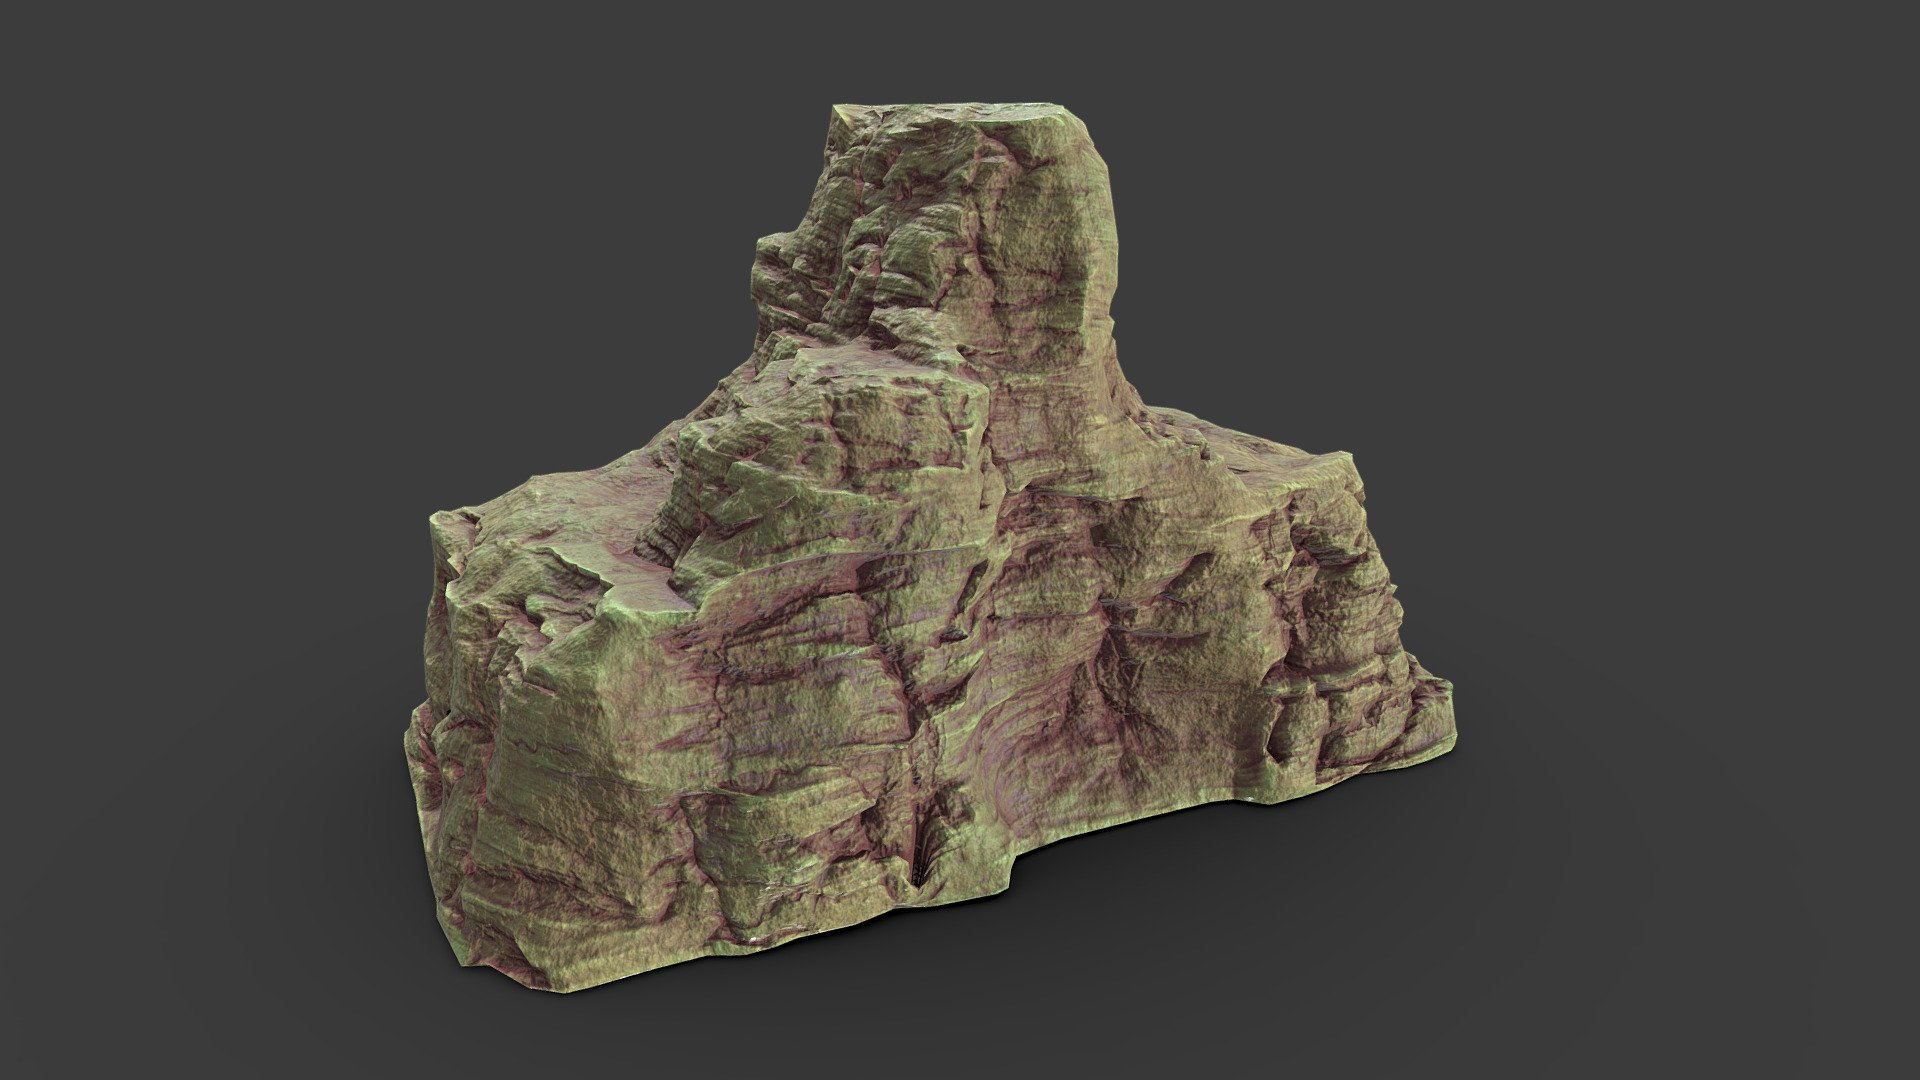 Desert Cliff low poly

Topology: Tris

Polygon count: 11898

Vertices count: 5951

Textures: Diffuse, Normal, Specular, Glossiness, Emissive, Height, Ambient Occlusion ( all in 4k resolution)

UV mapped with non-overlapping

All files are zipped in one folder. Contains 3 file formats obj, blend &amp; fbx

Useful for games, renders, background scenes and other graphical projects 3d model